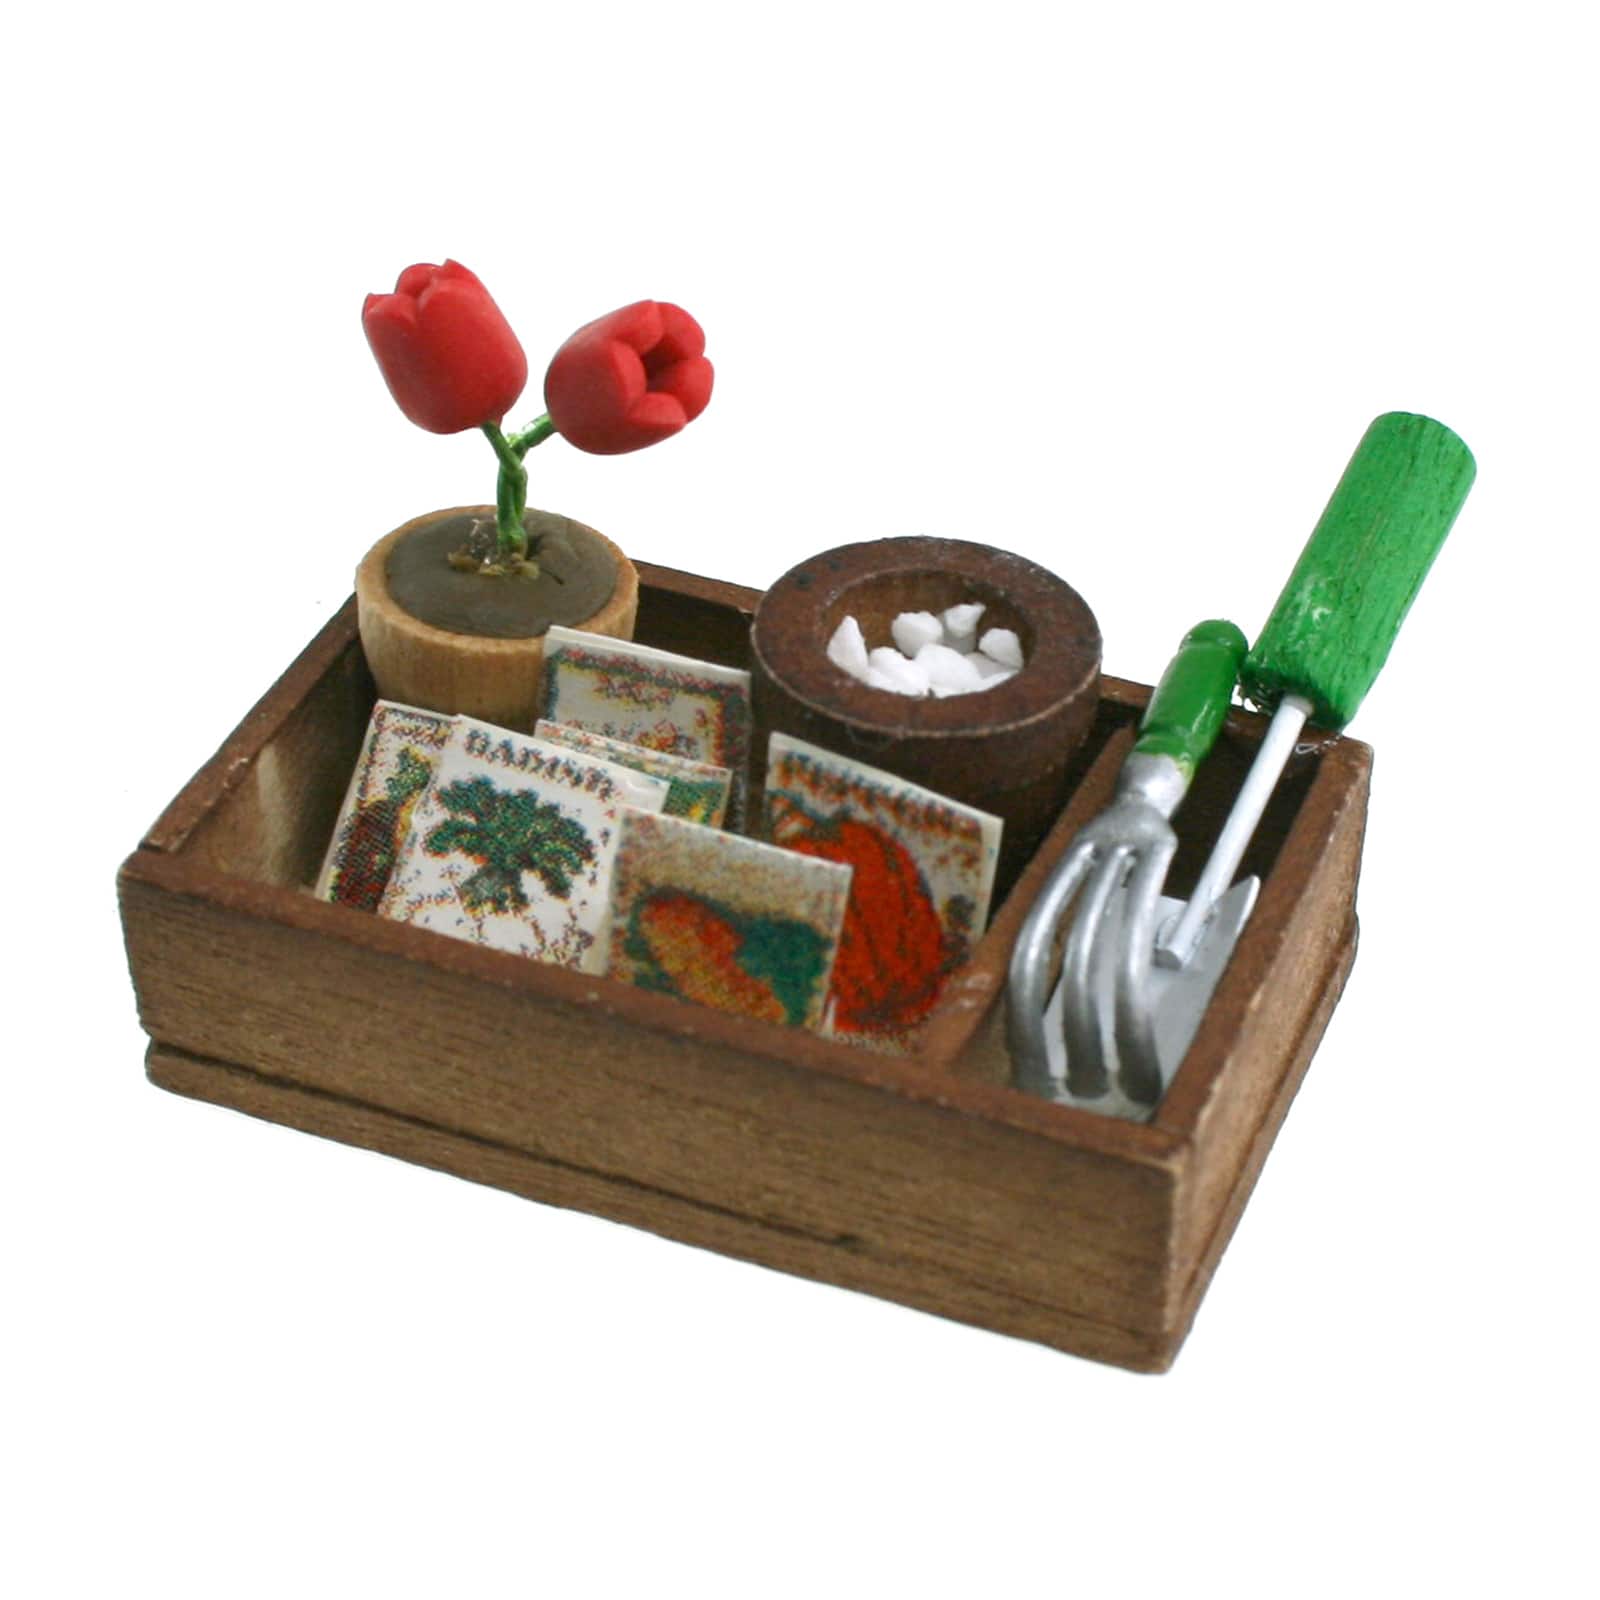 Buy The Sparrow Innovations Miniatures Flower Gardening Box At